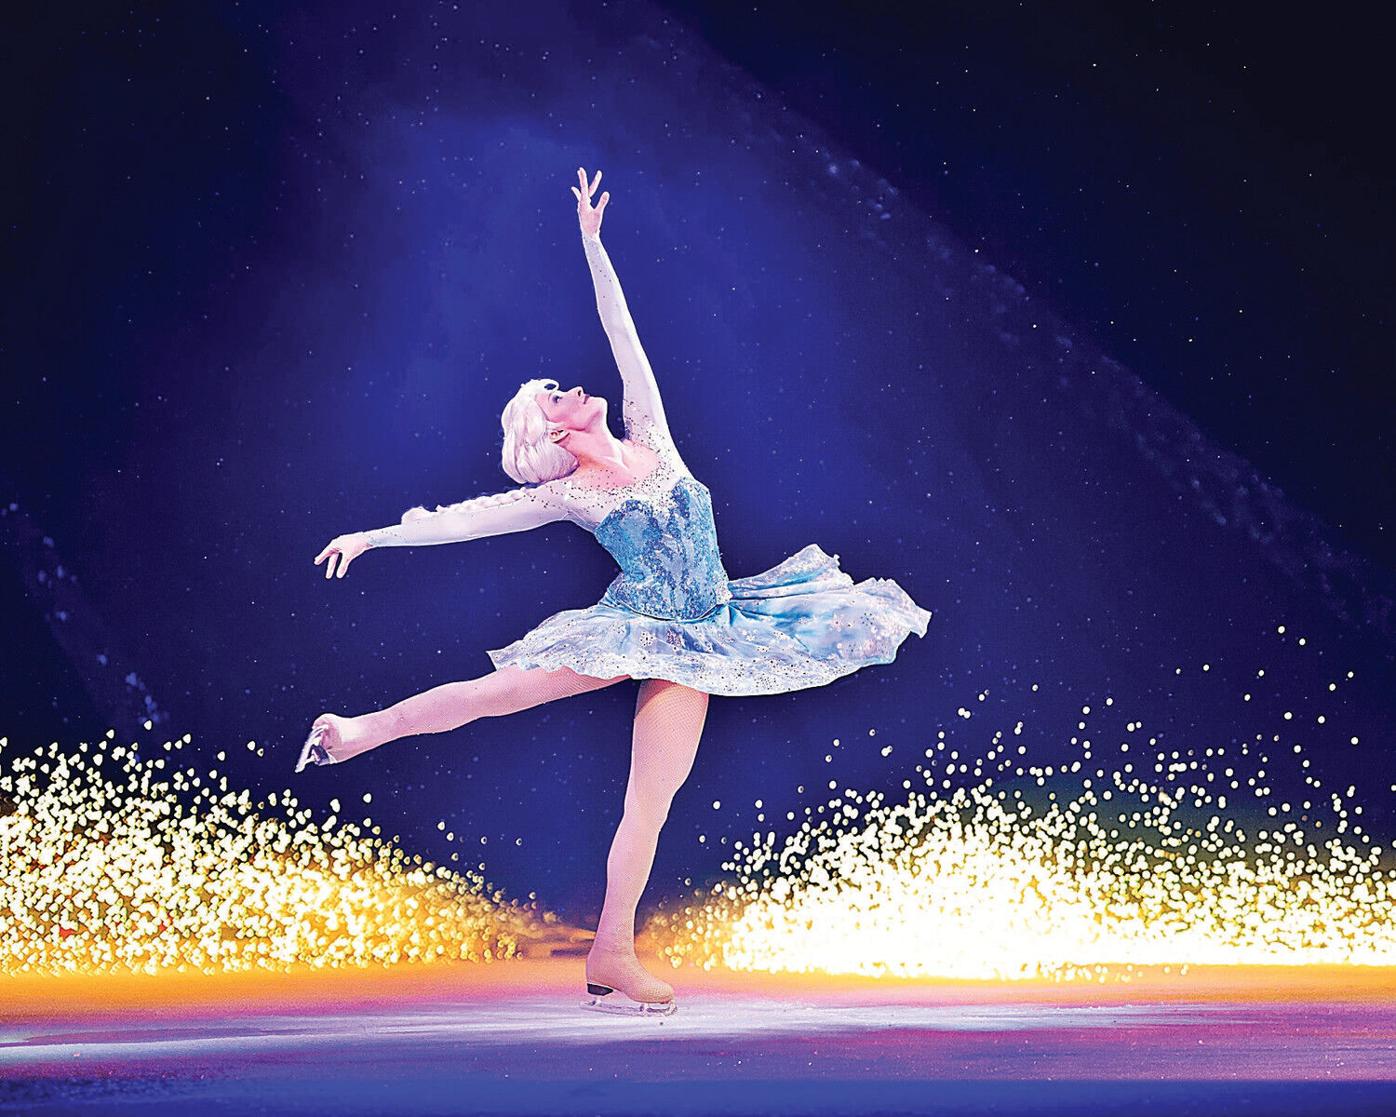 East Greenbush skater on solid ice as Elsa in touring